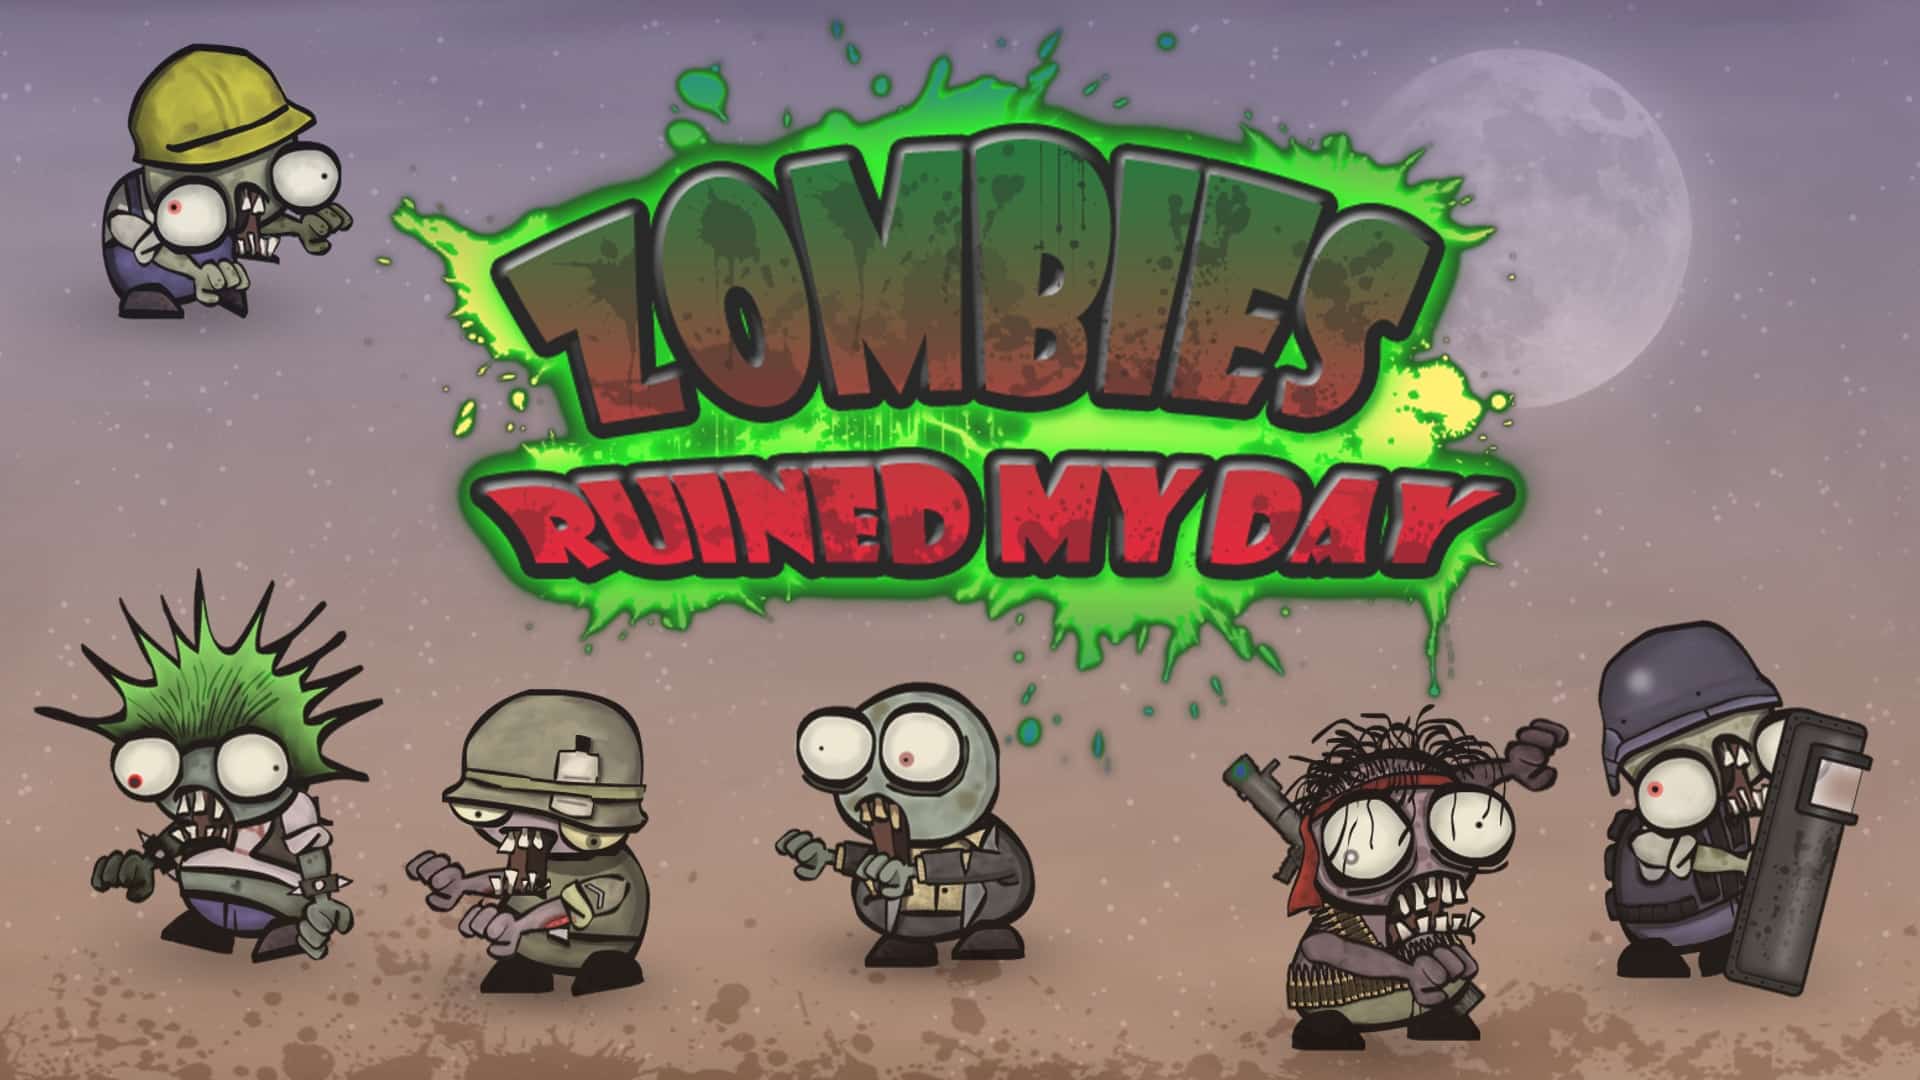 Zombies Ruined My Day player count stats